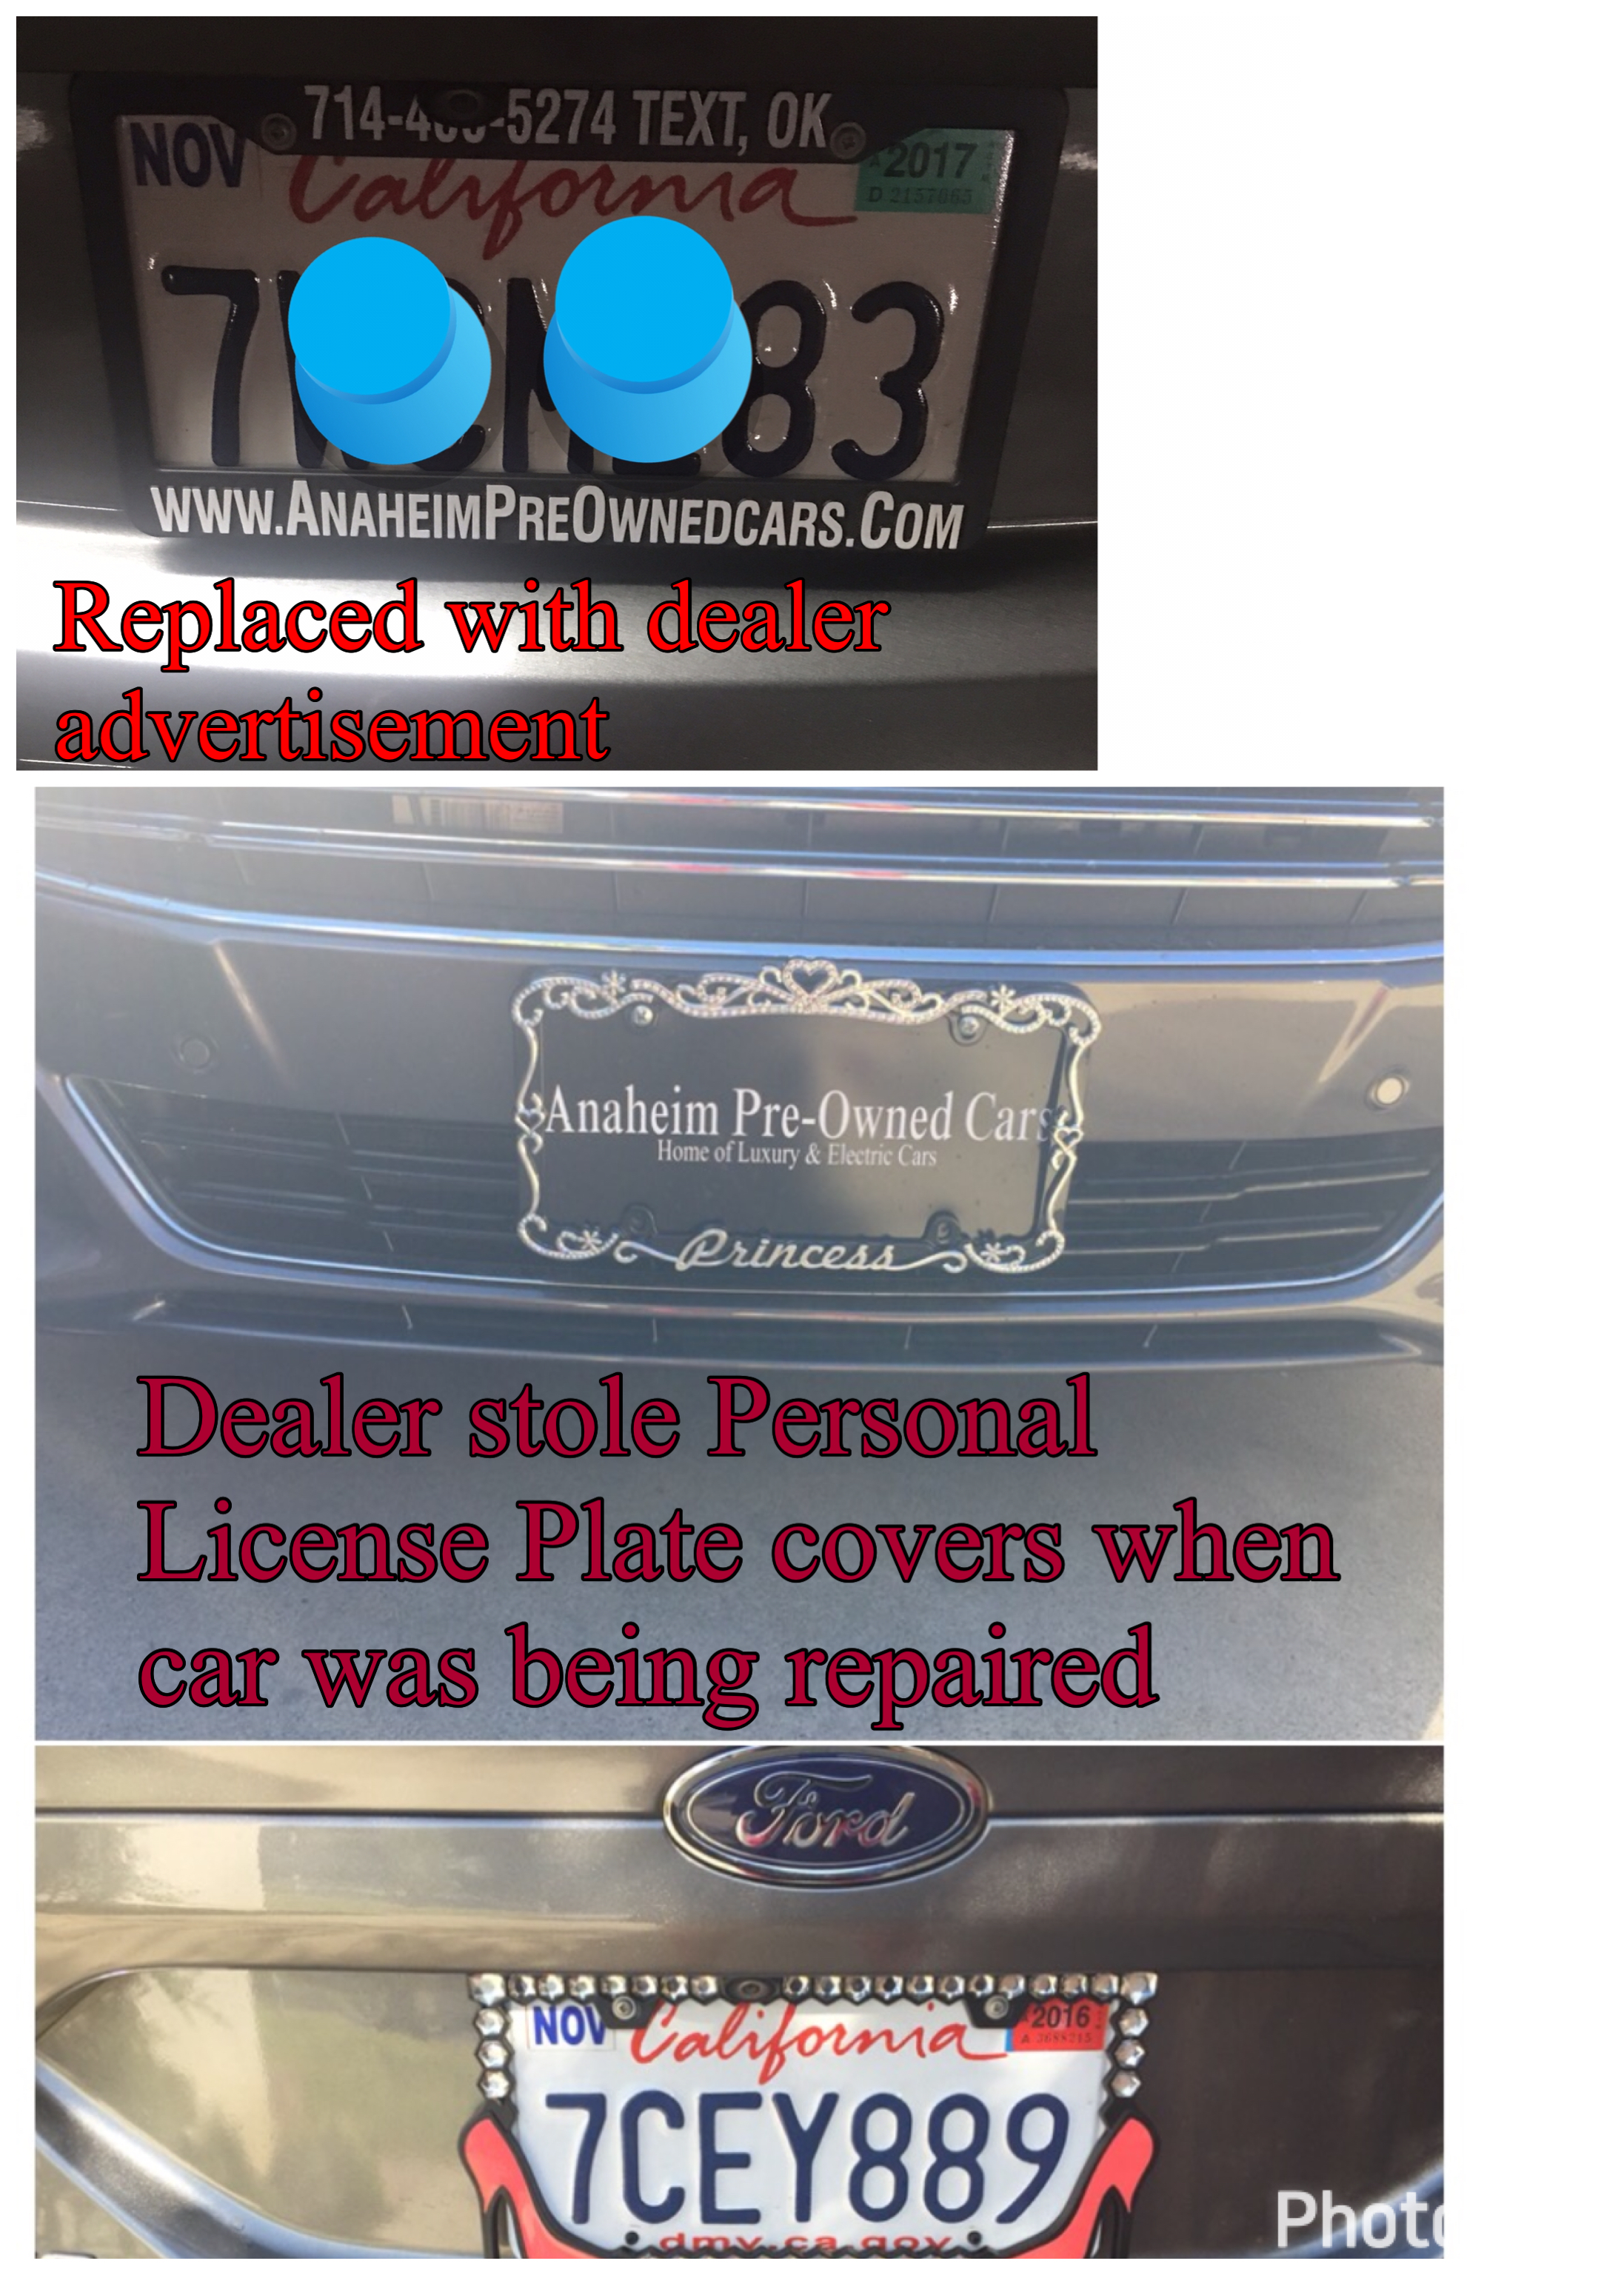 My license plate was stole when the car was serviced and replace with dealer plates 